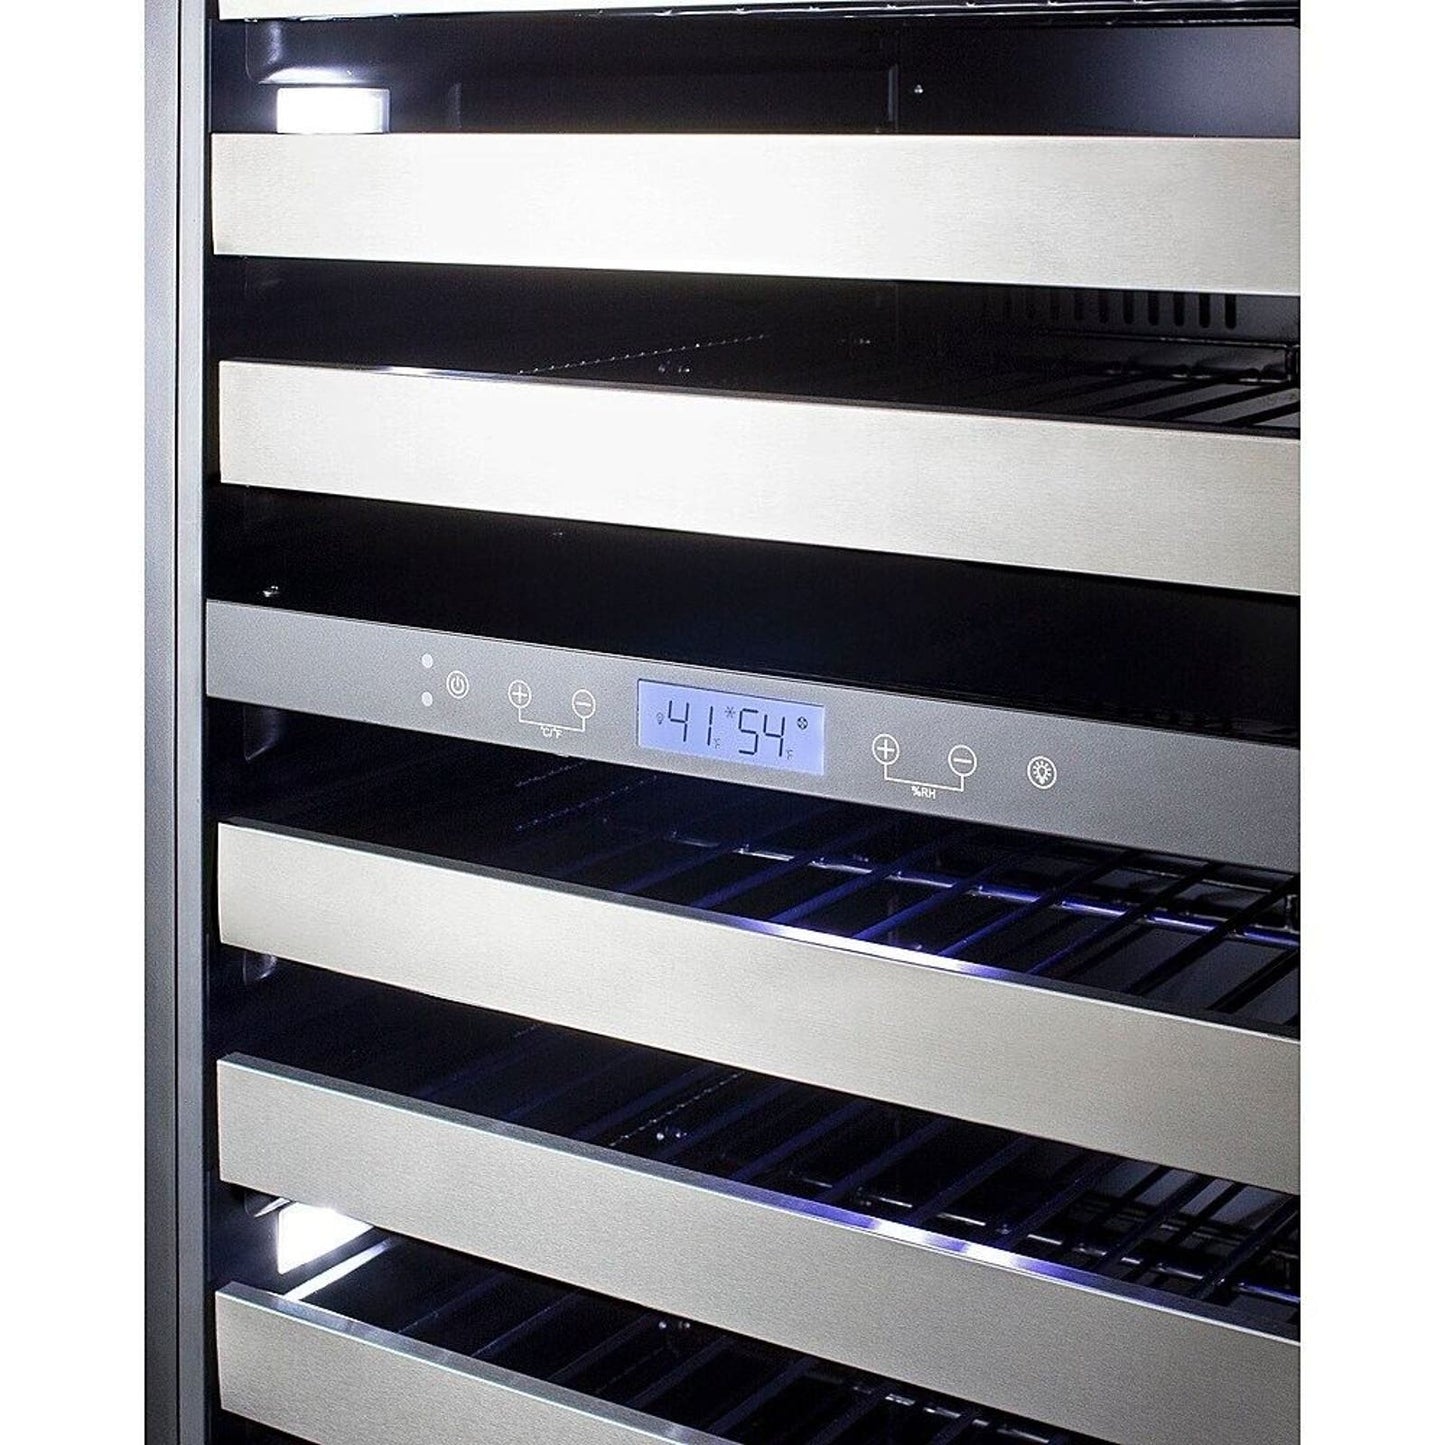 Summit Appliance - LWC2Z195 Dual Zone Commercial Wine Cellar Cooler - Stainless Steel